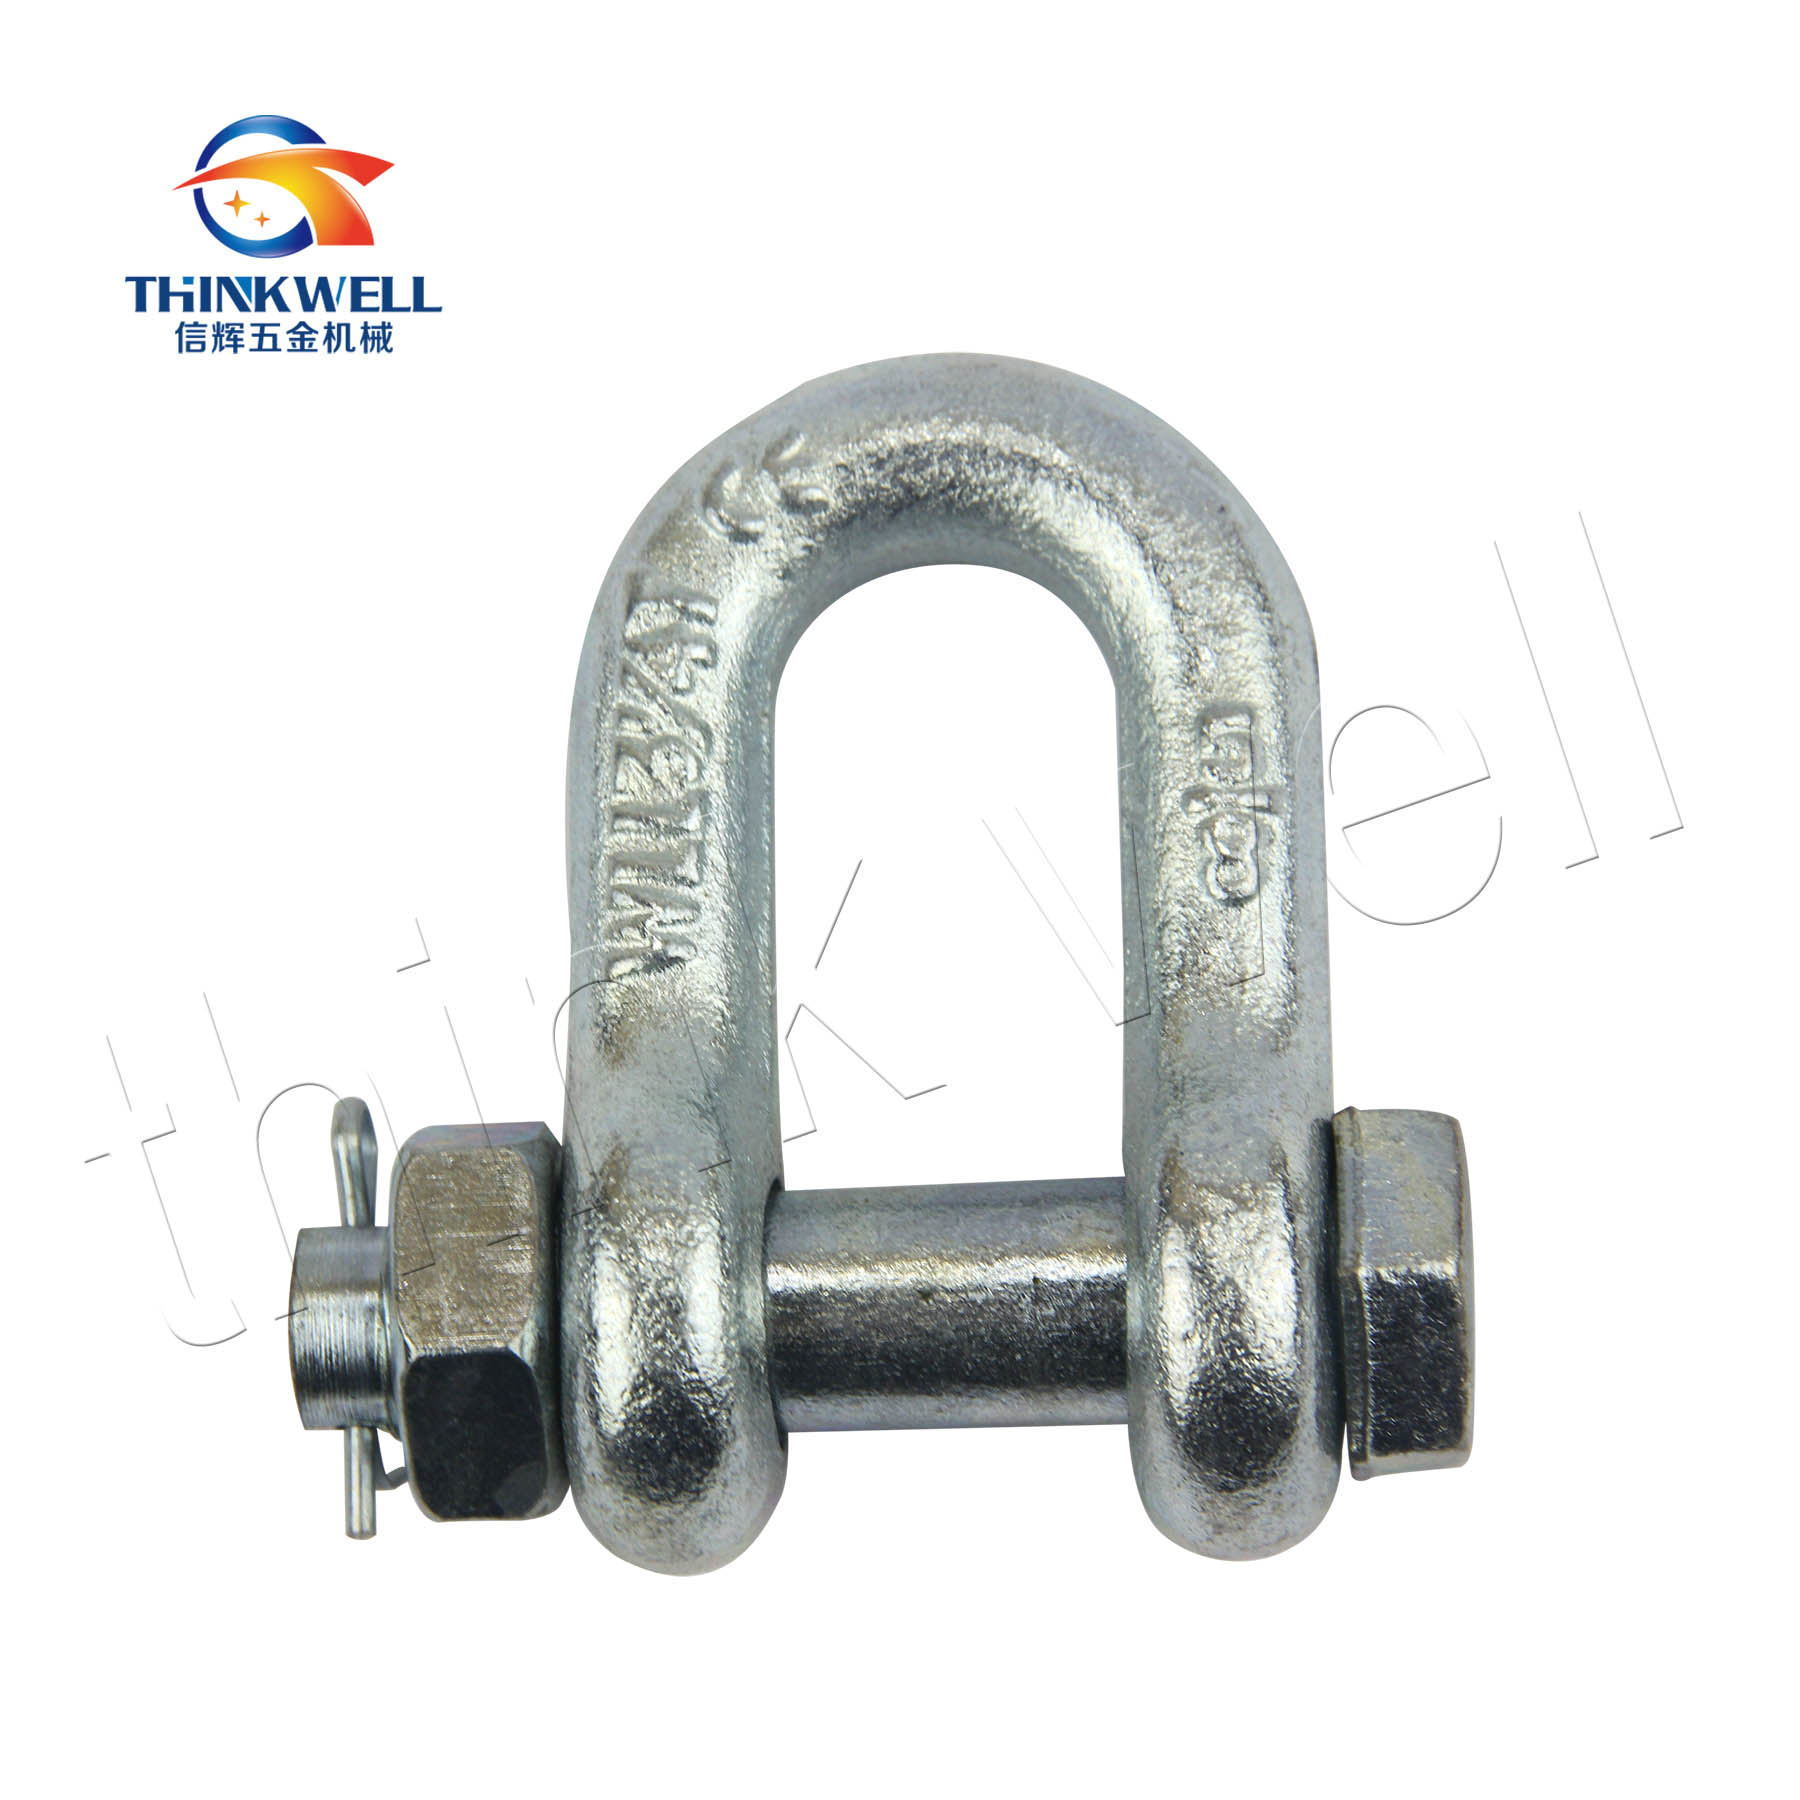 Forged Galvanized G2150 Chain Shackle with Safety Bolt Pin